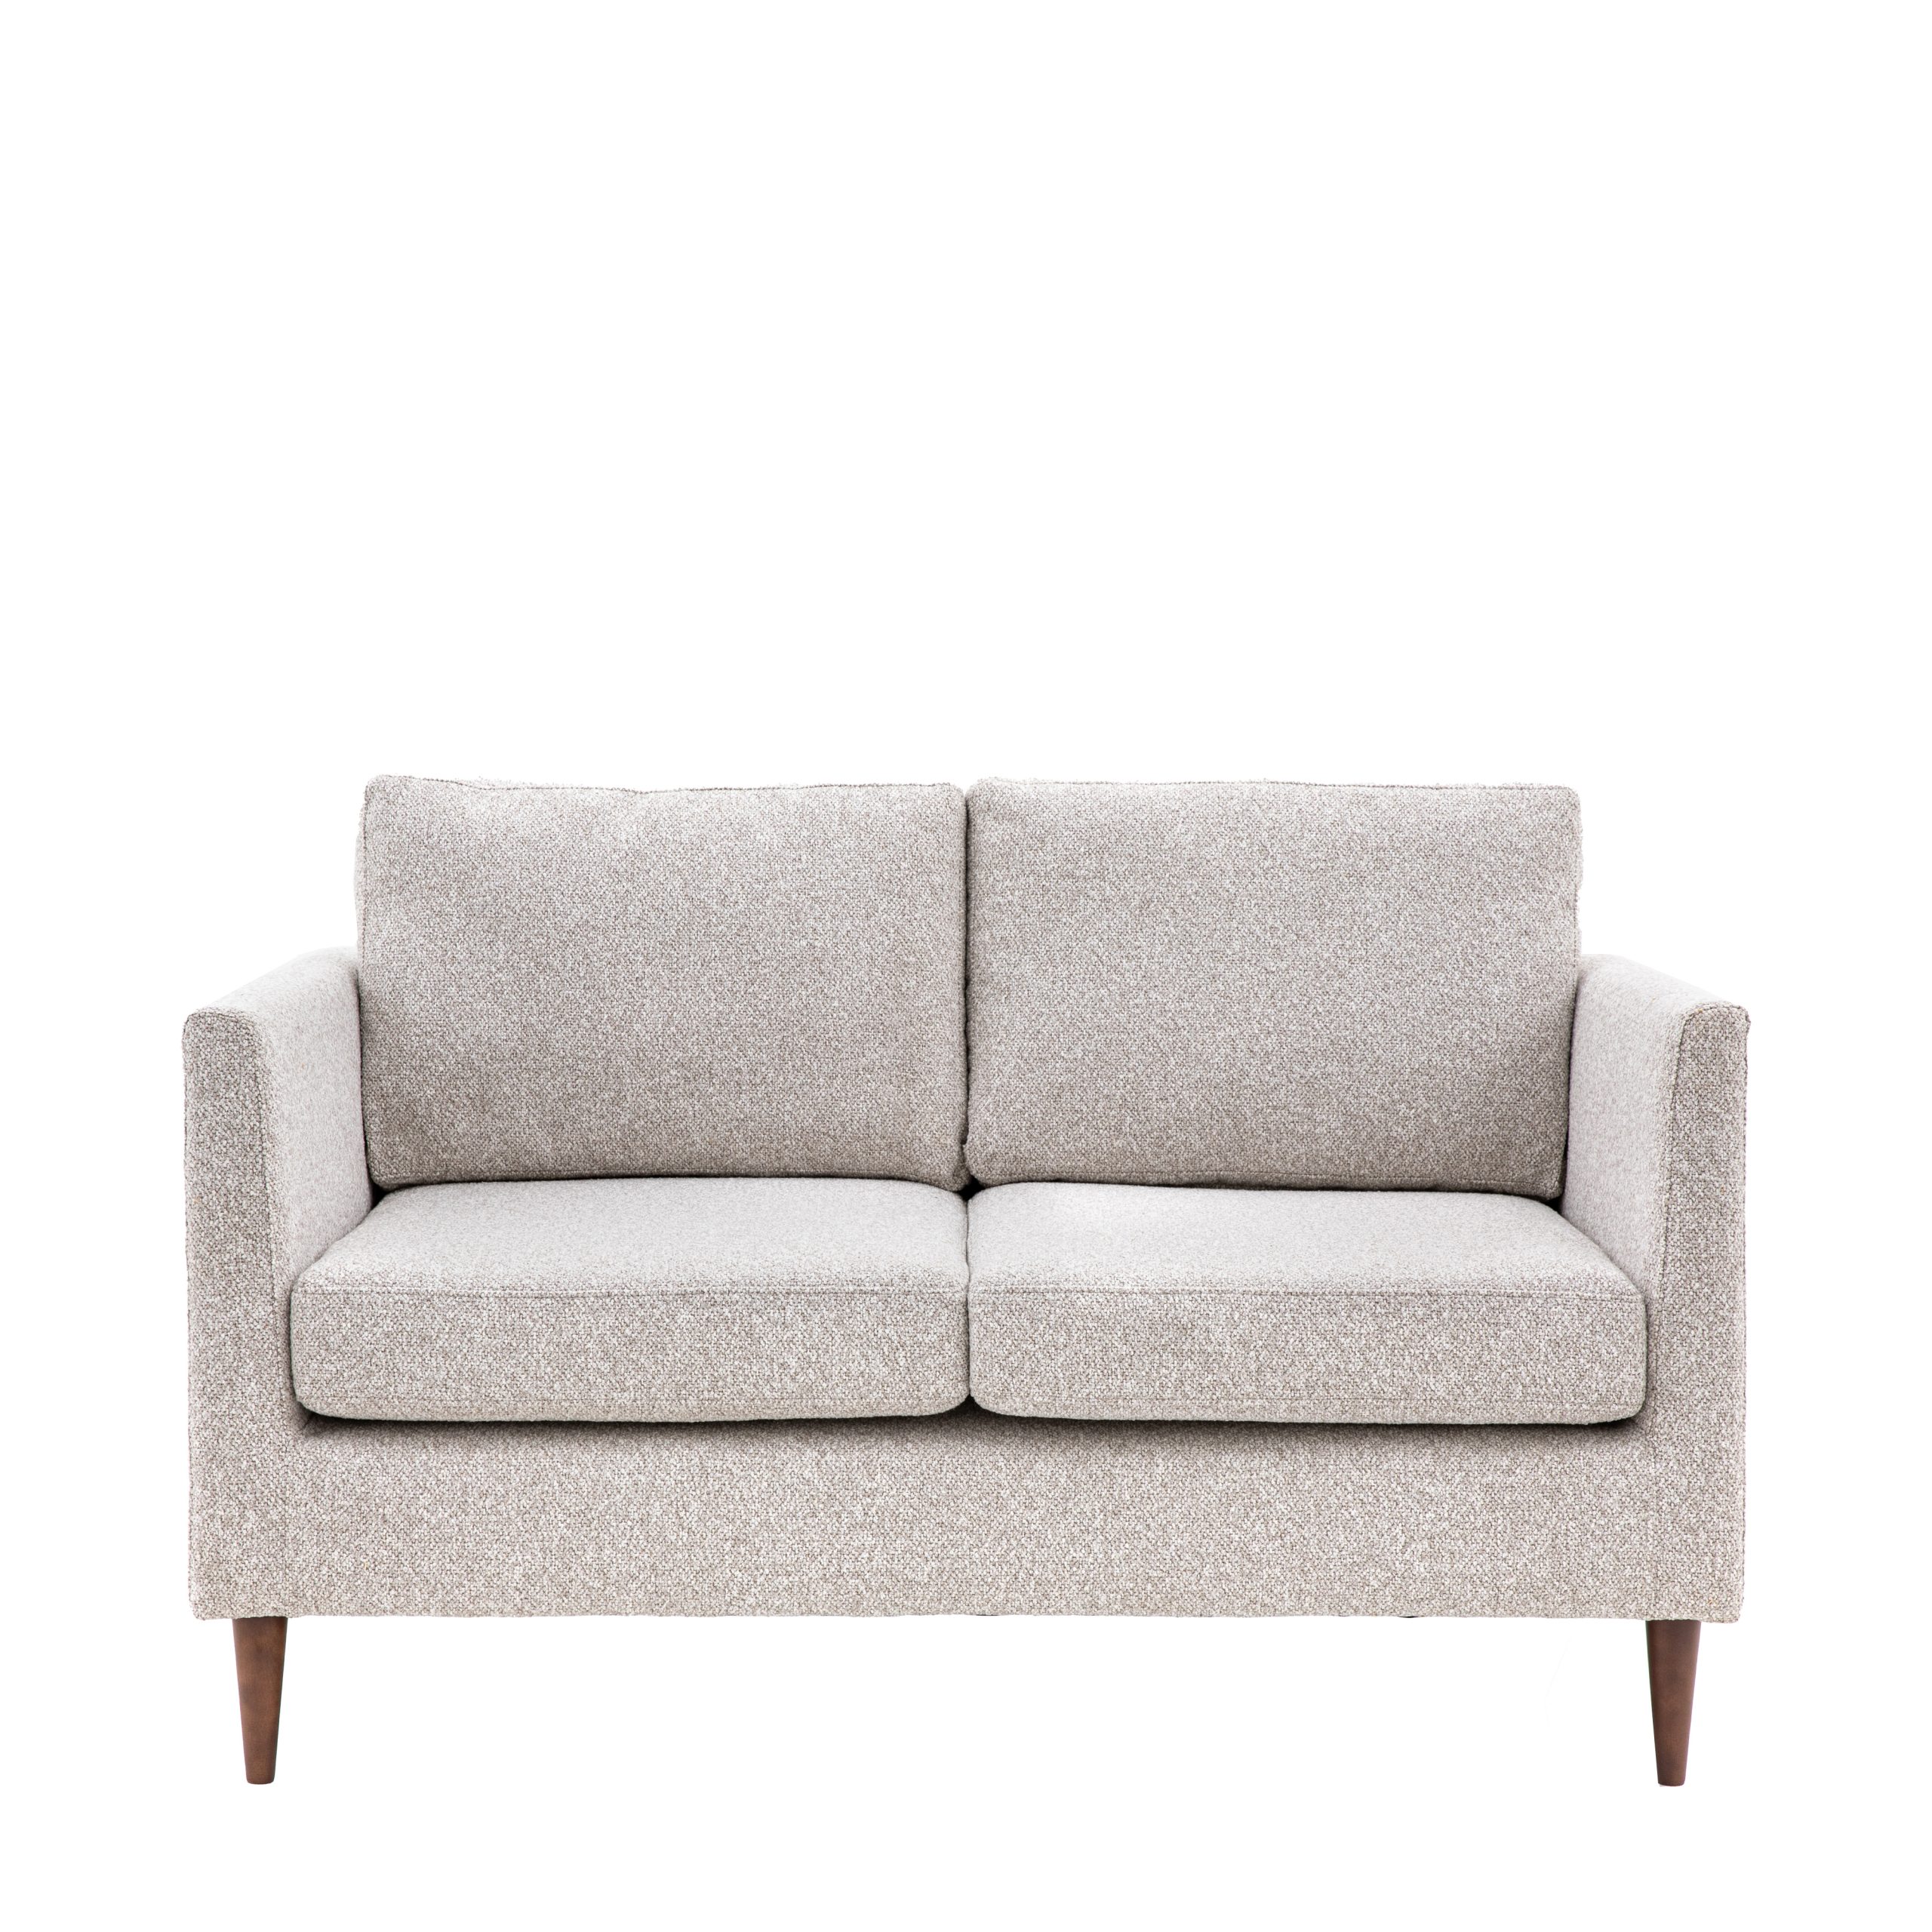 Gallery Direct Gateford Sofa 2 Seater Natural